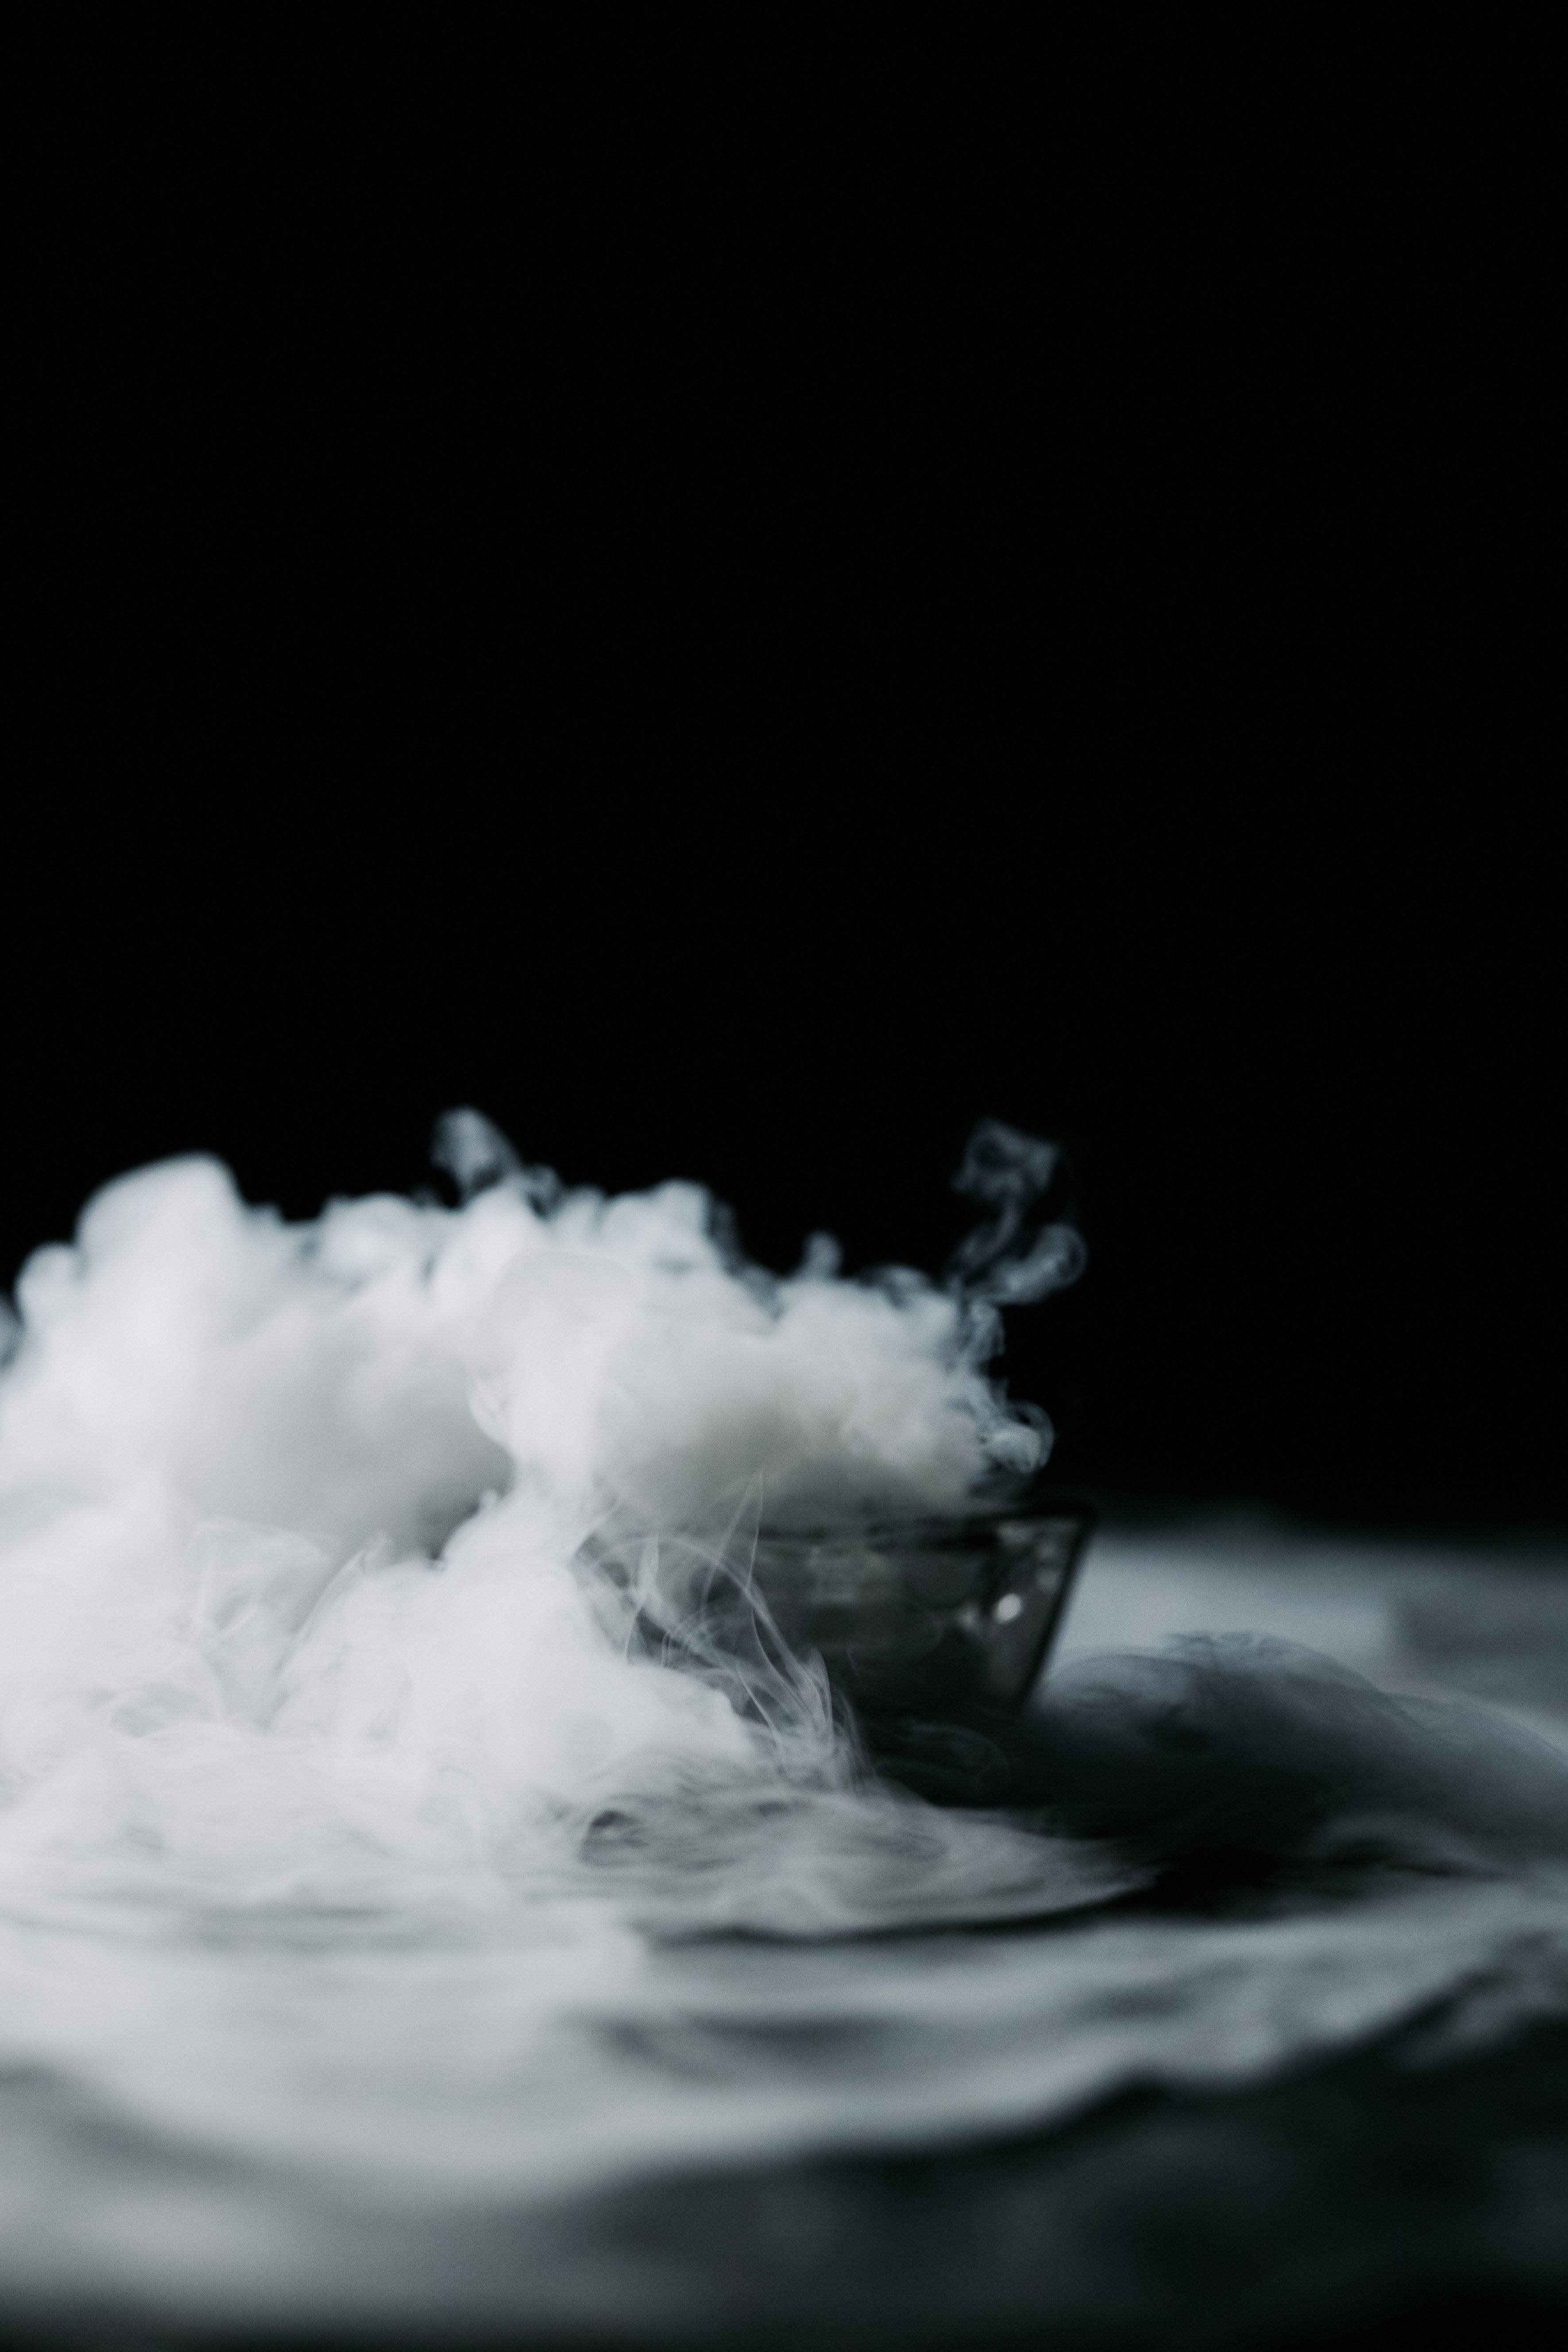 A Thick White Smoke Against Black Background · Free